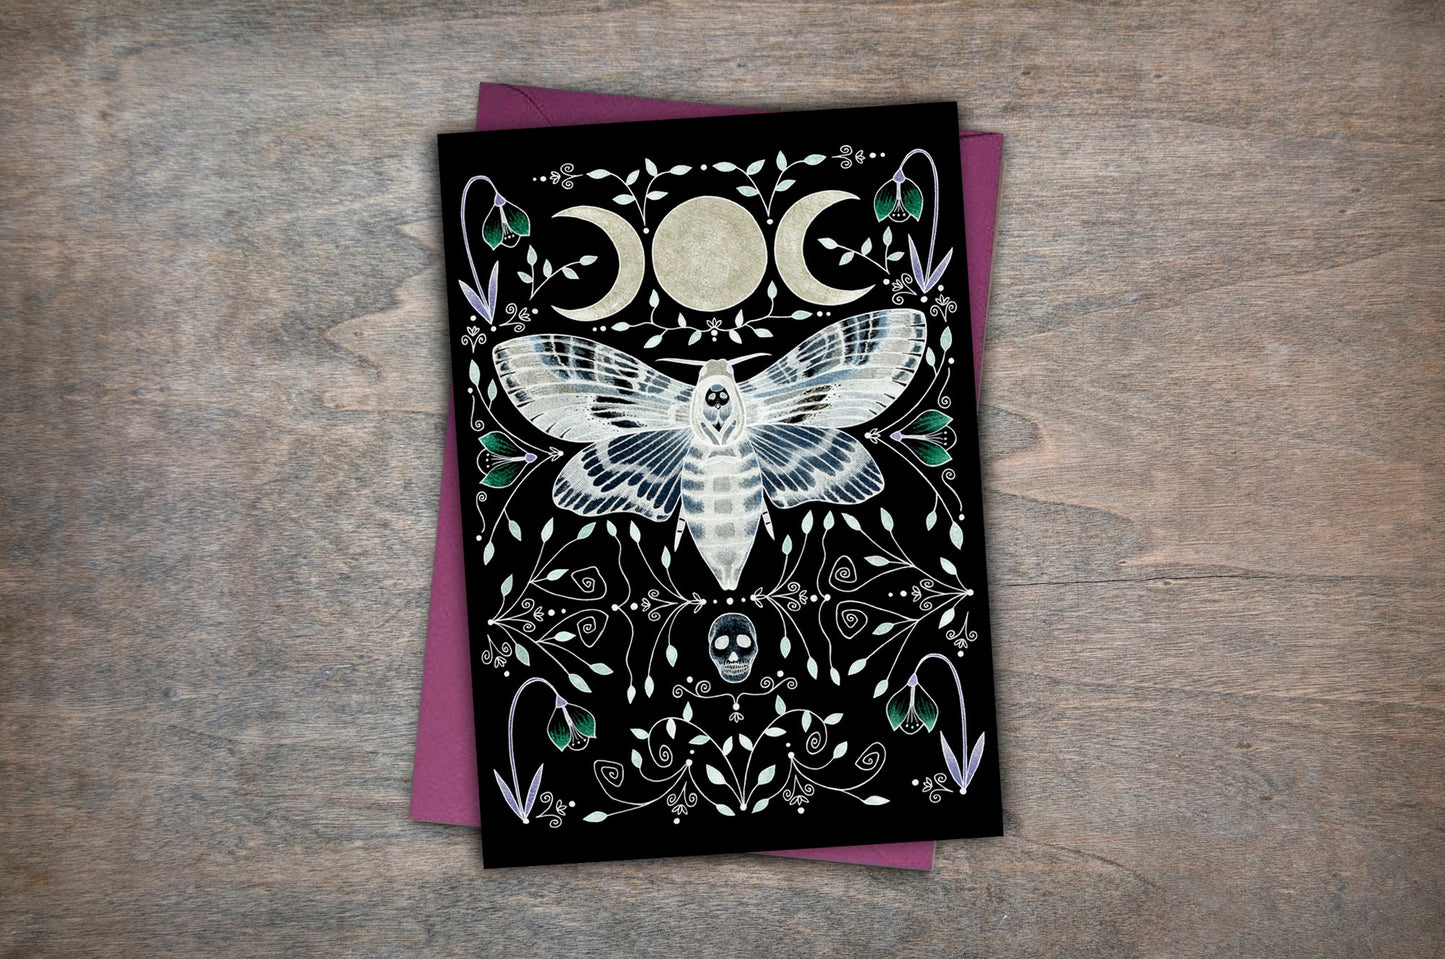 Black Moth Greetings Card & Envelope - Spooky Death's-head Hawkmoth Card - Gothic Ornate Lolita Insect Card - Black Blue Gothic Moth Gift